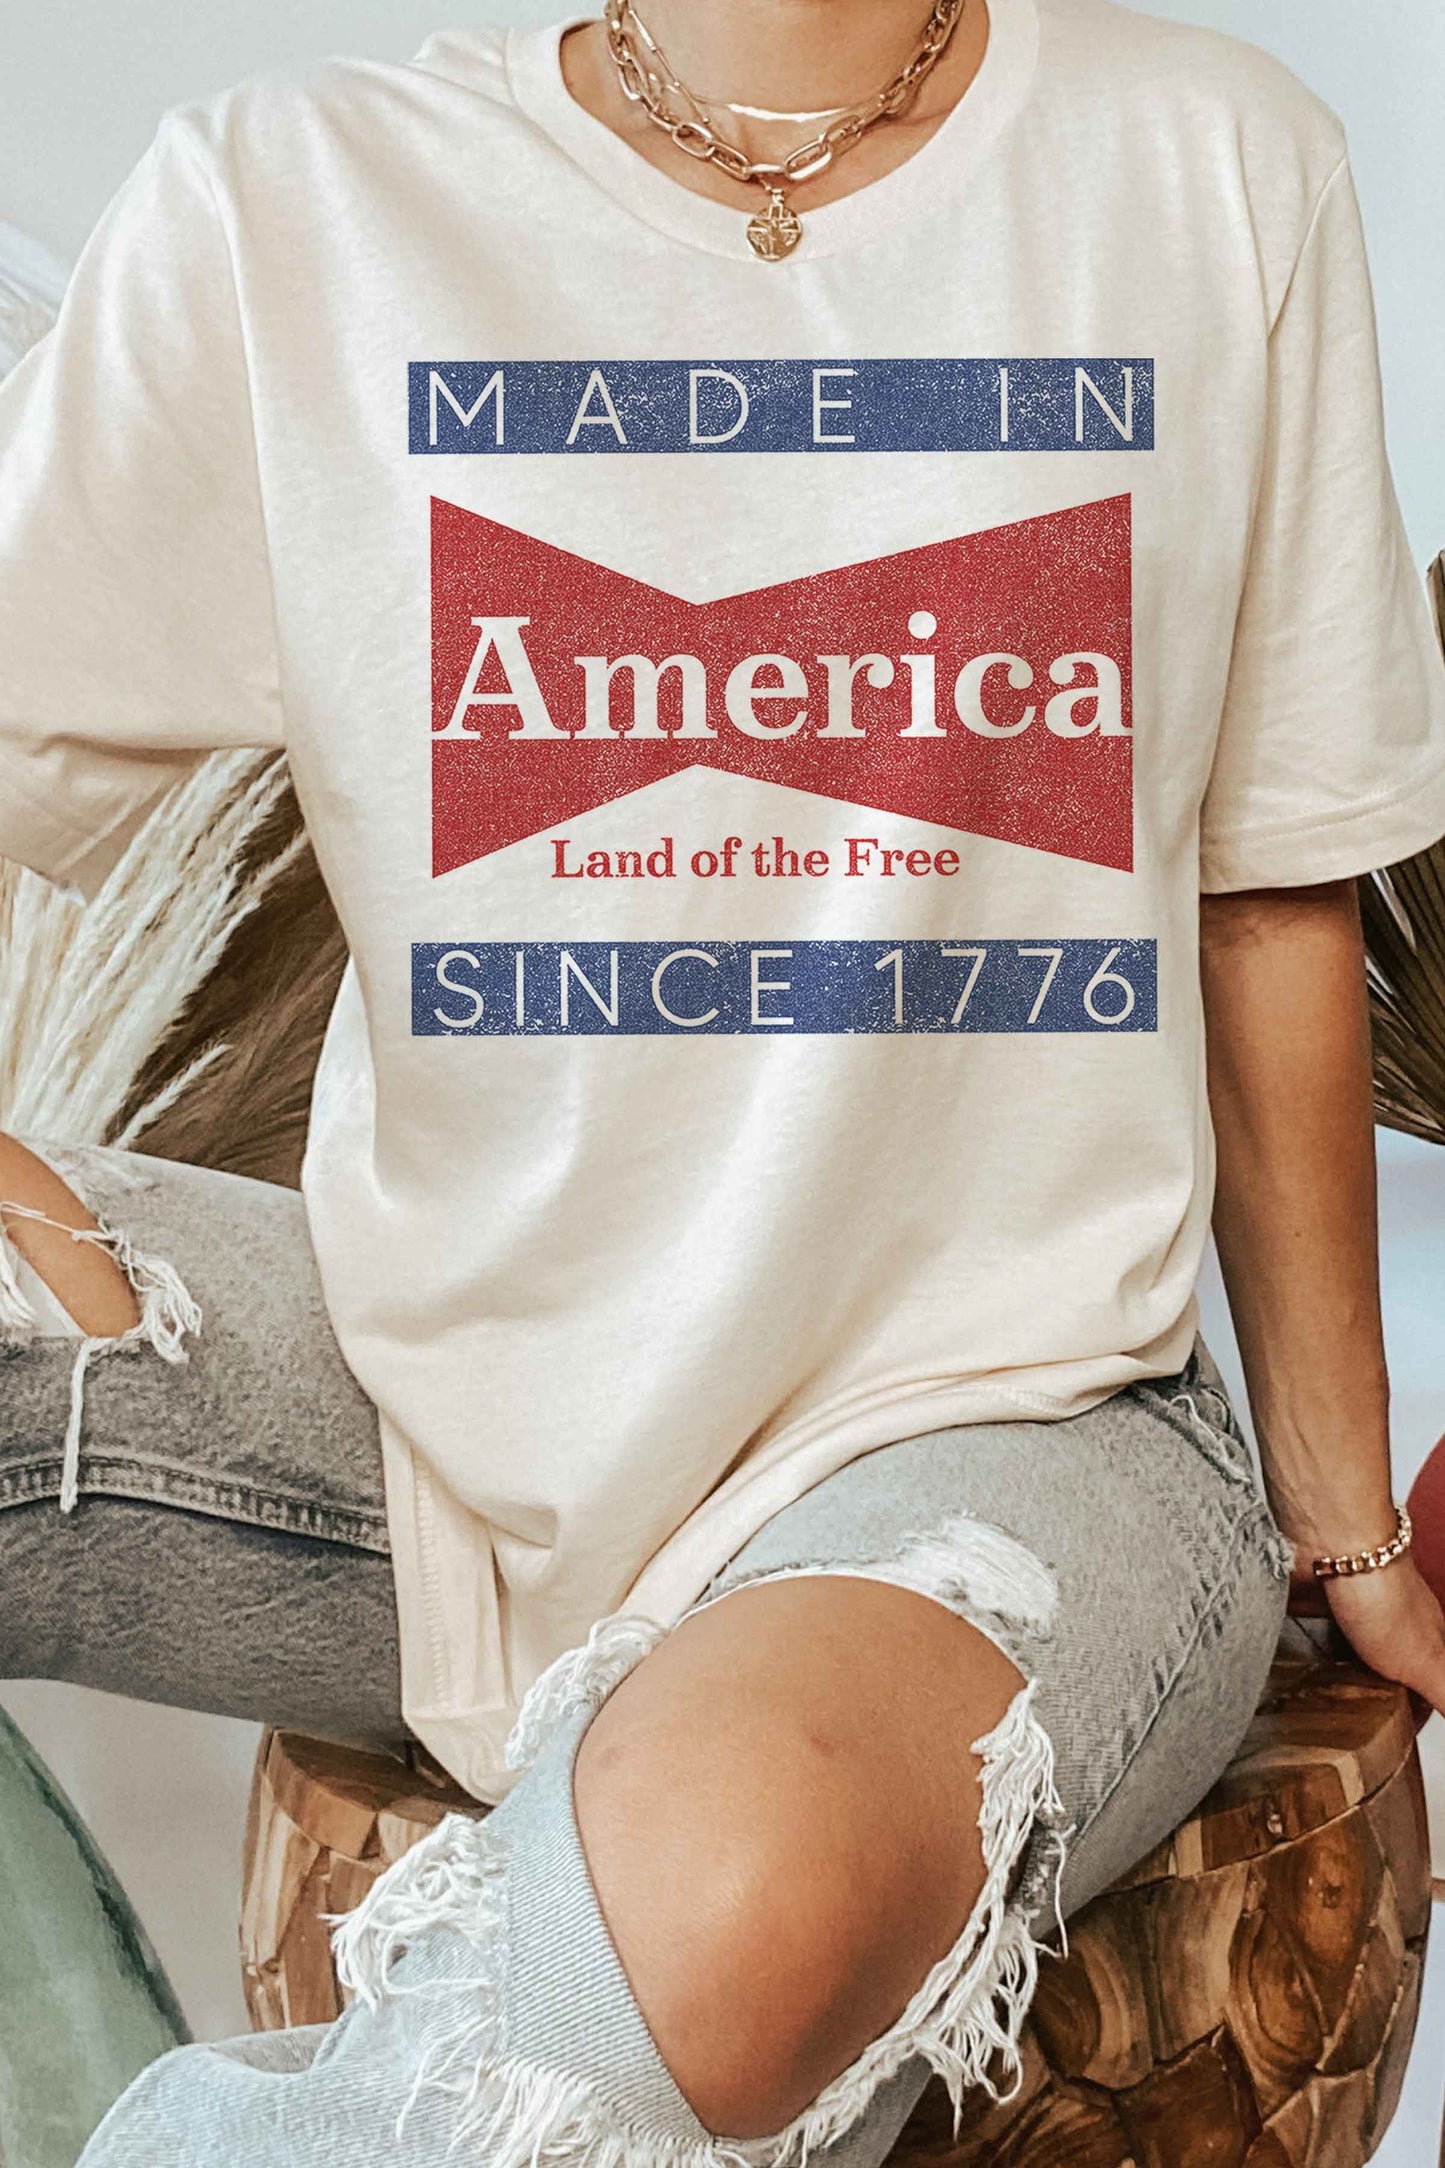 Made in America Graphic Tee